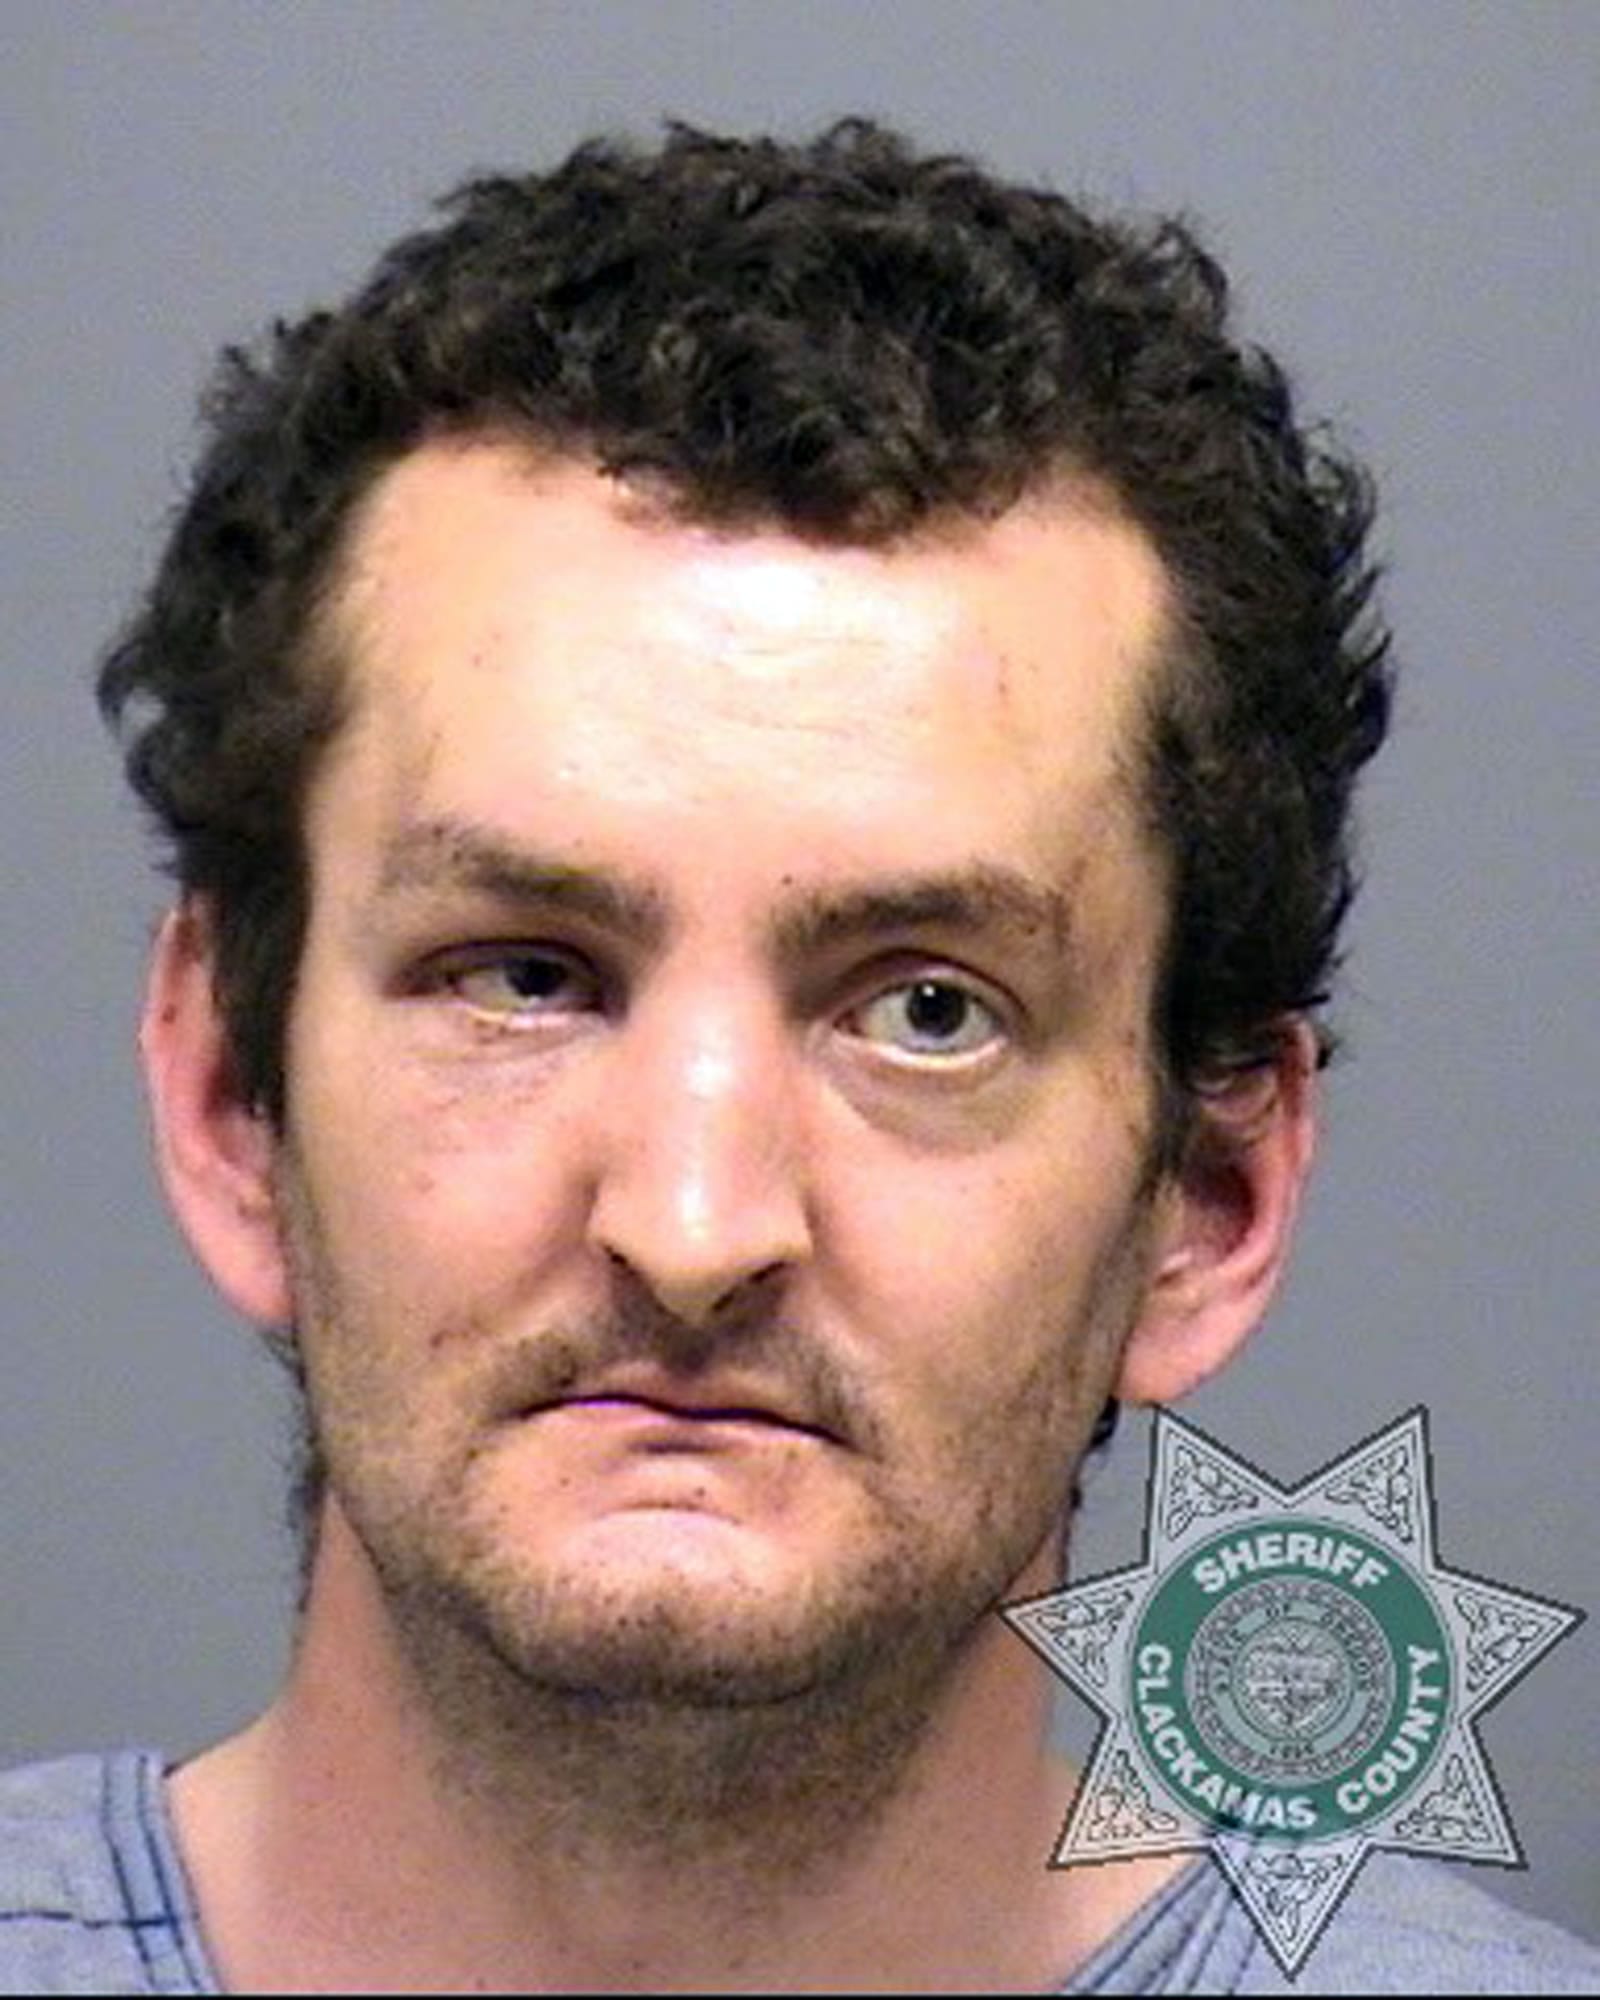 Joshua Webb has been arrested and charged with murder and attempted murder in connection with the stabbing of a grocery employee in Estacada, Ore., on Sunday and the discovery of his mother's body in the house they shared.